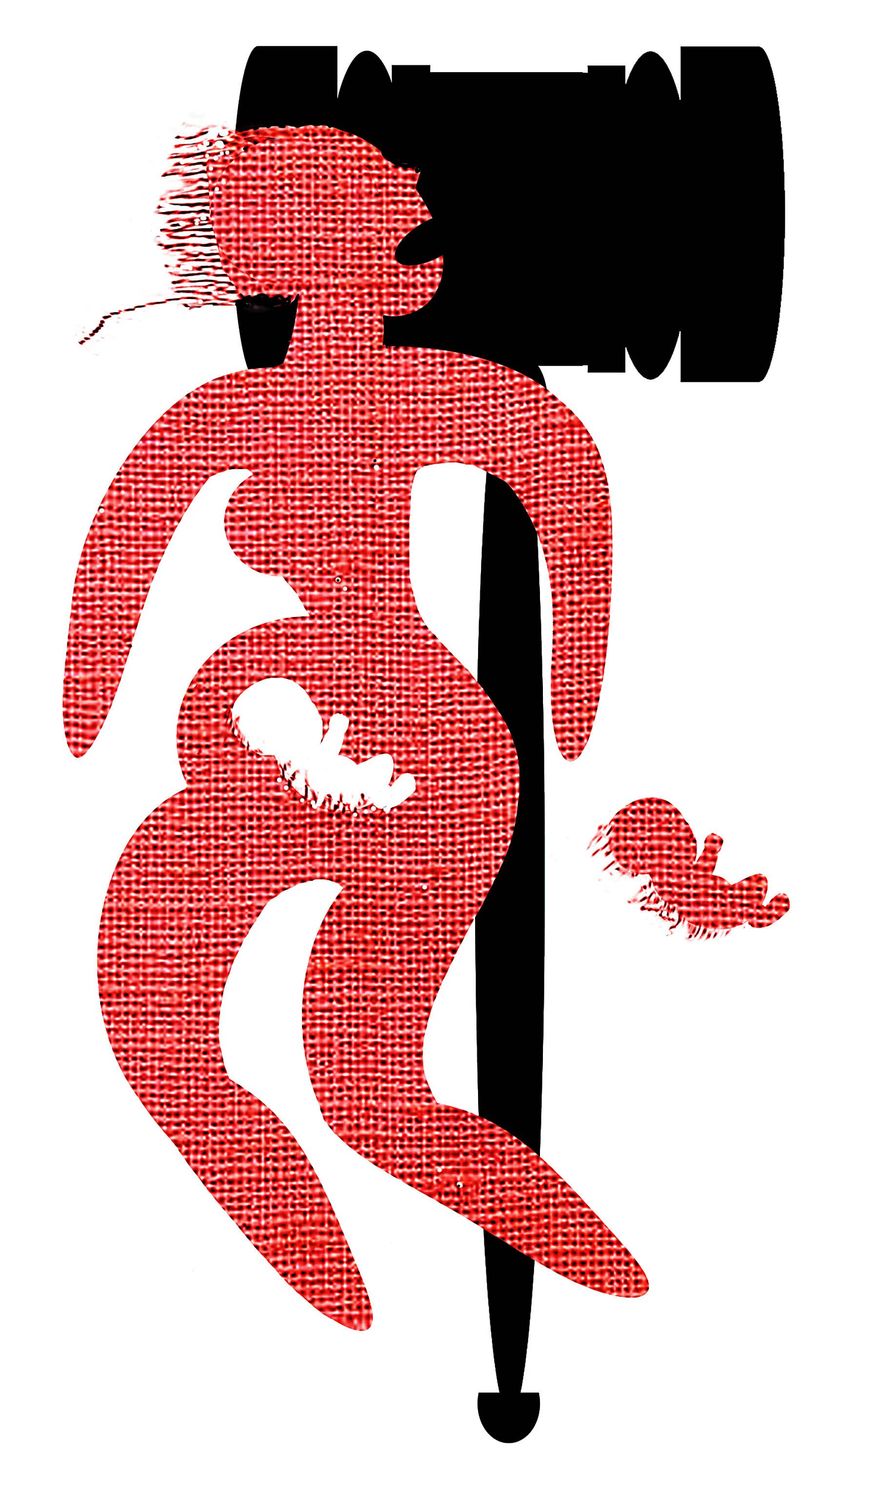 Illustration on the Supreme Court and abortion by Alexander Hunter/The Washington Times